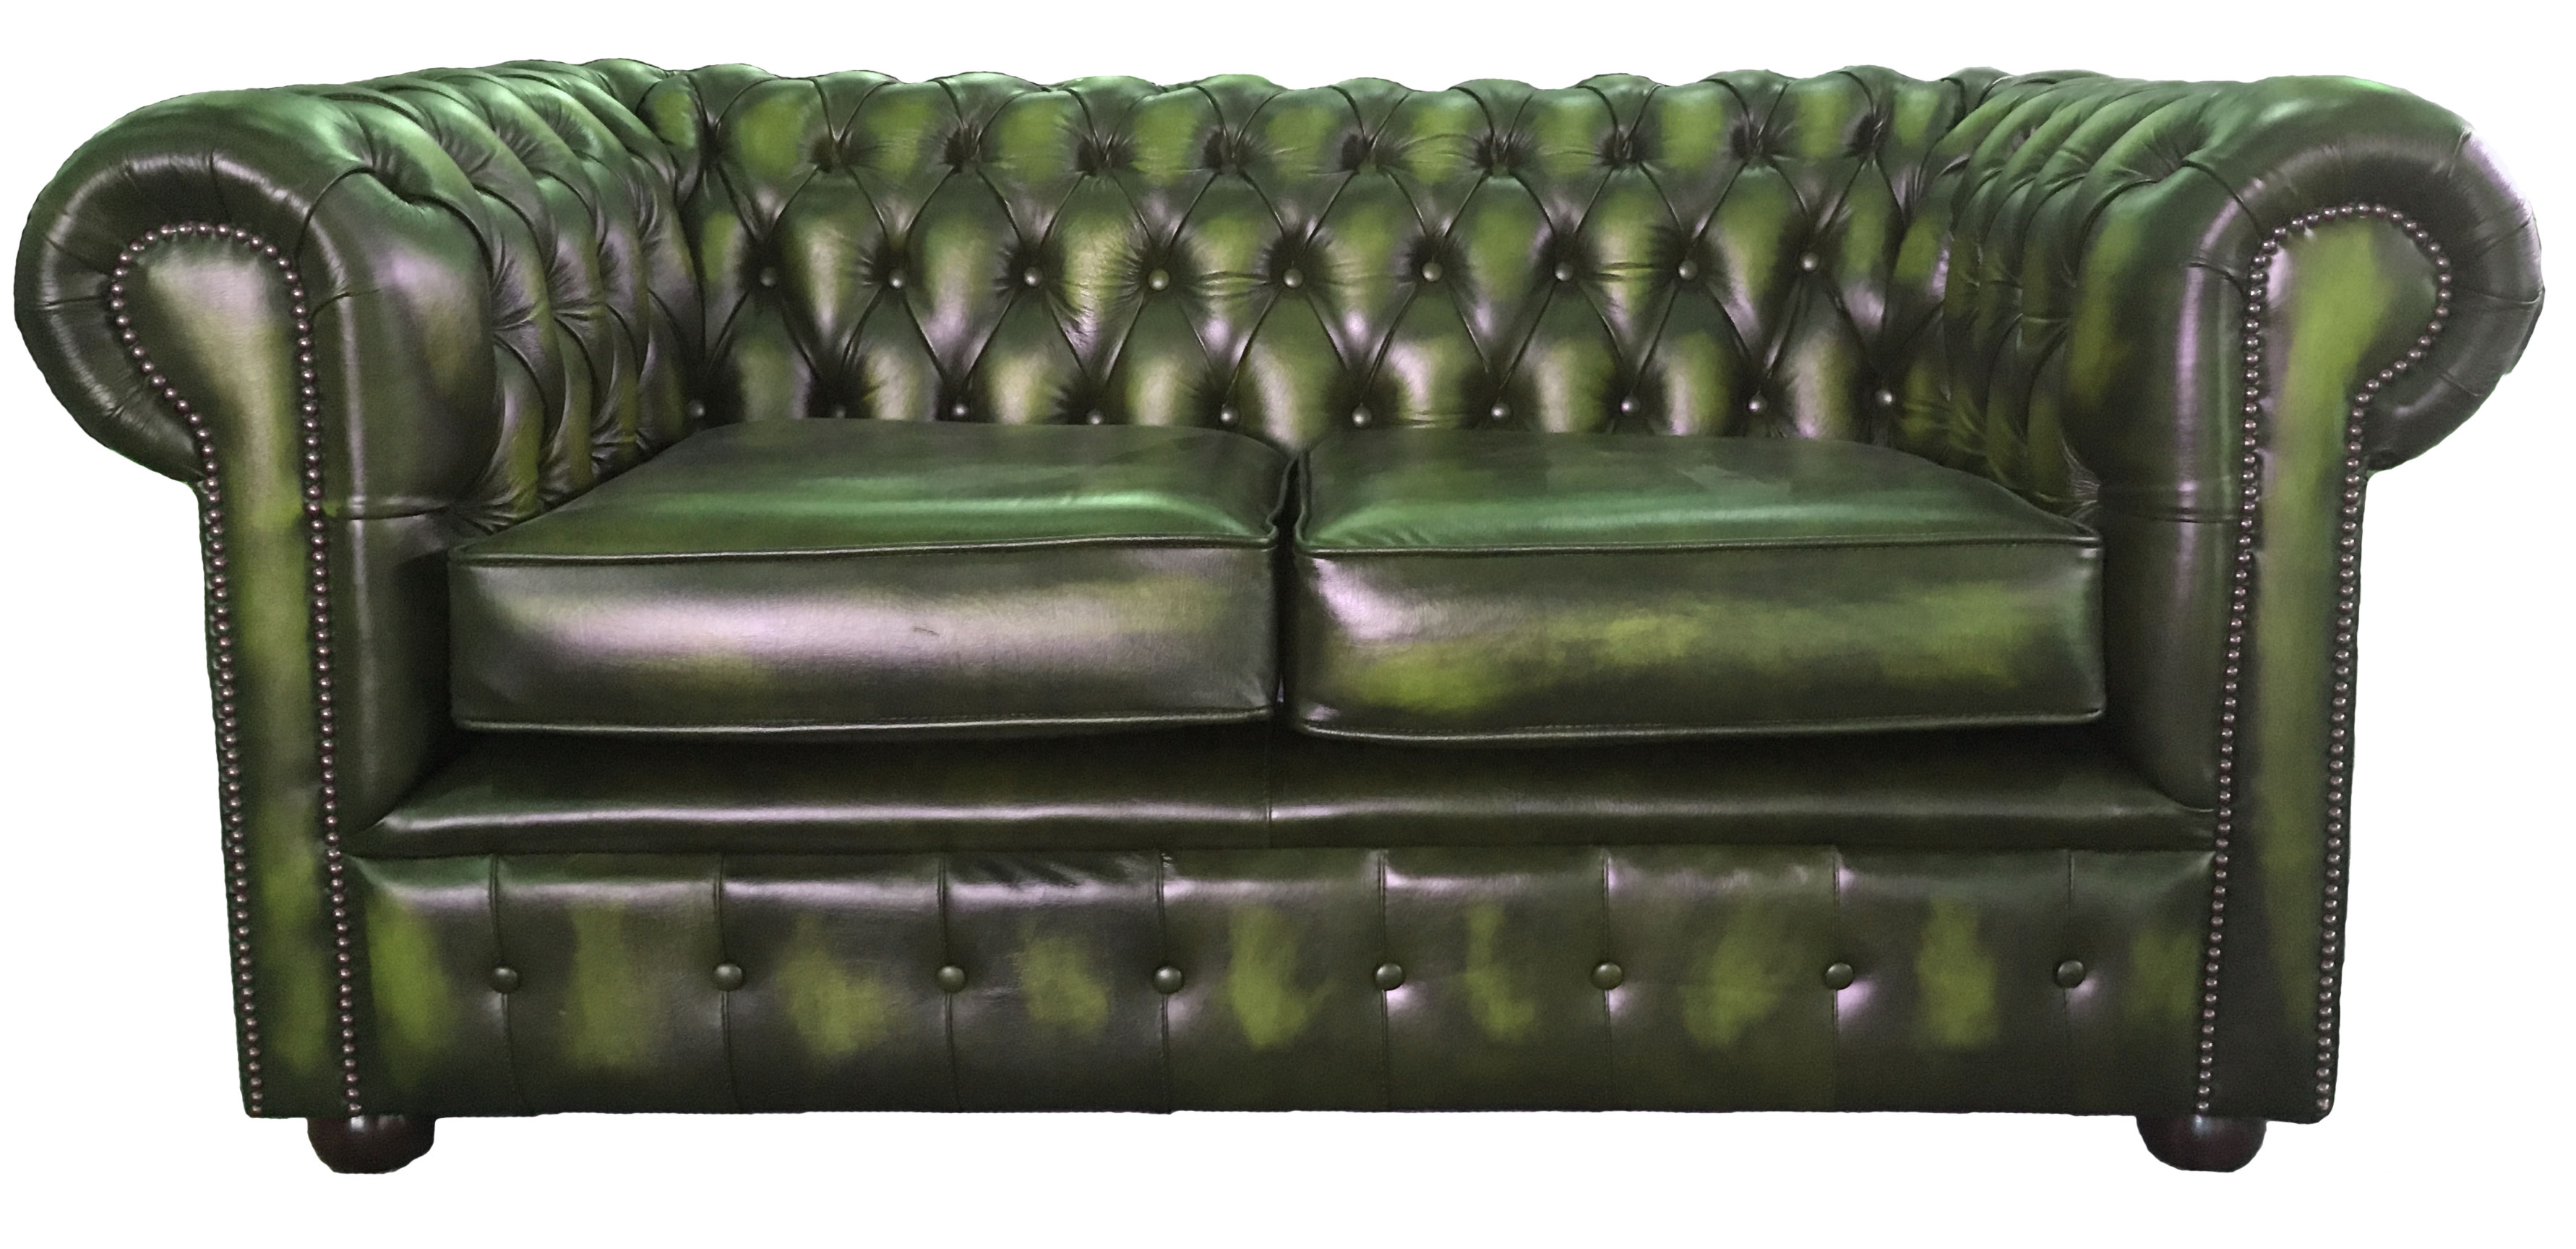 green chesterfield sofa bed